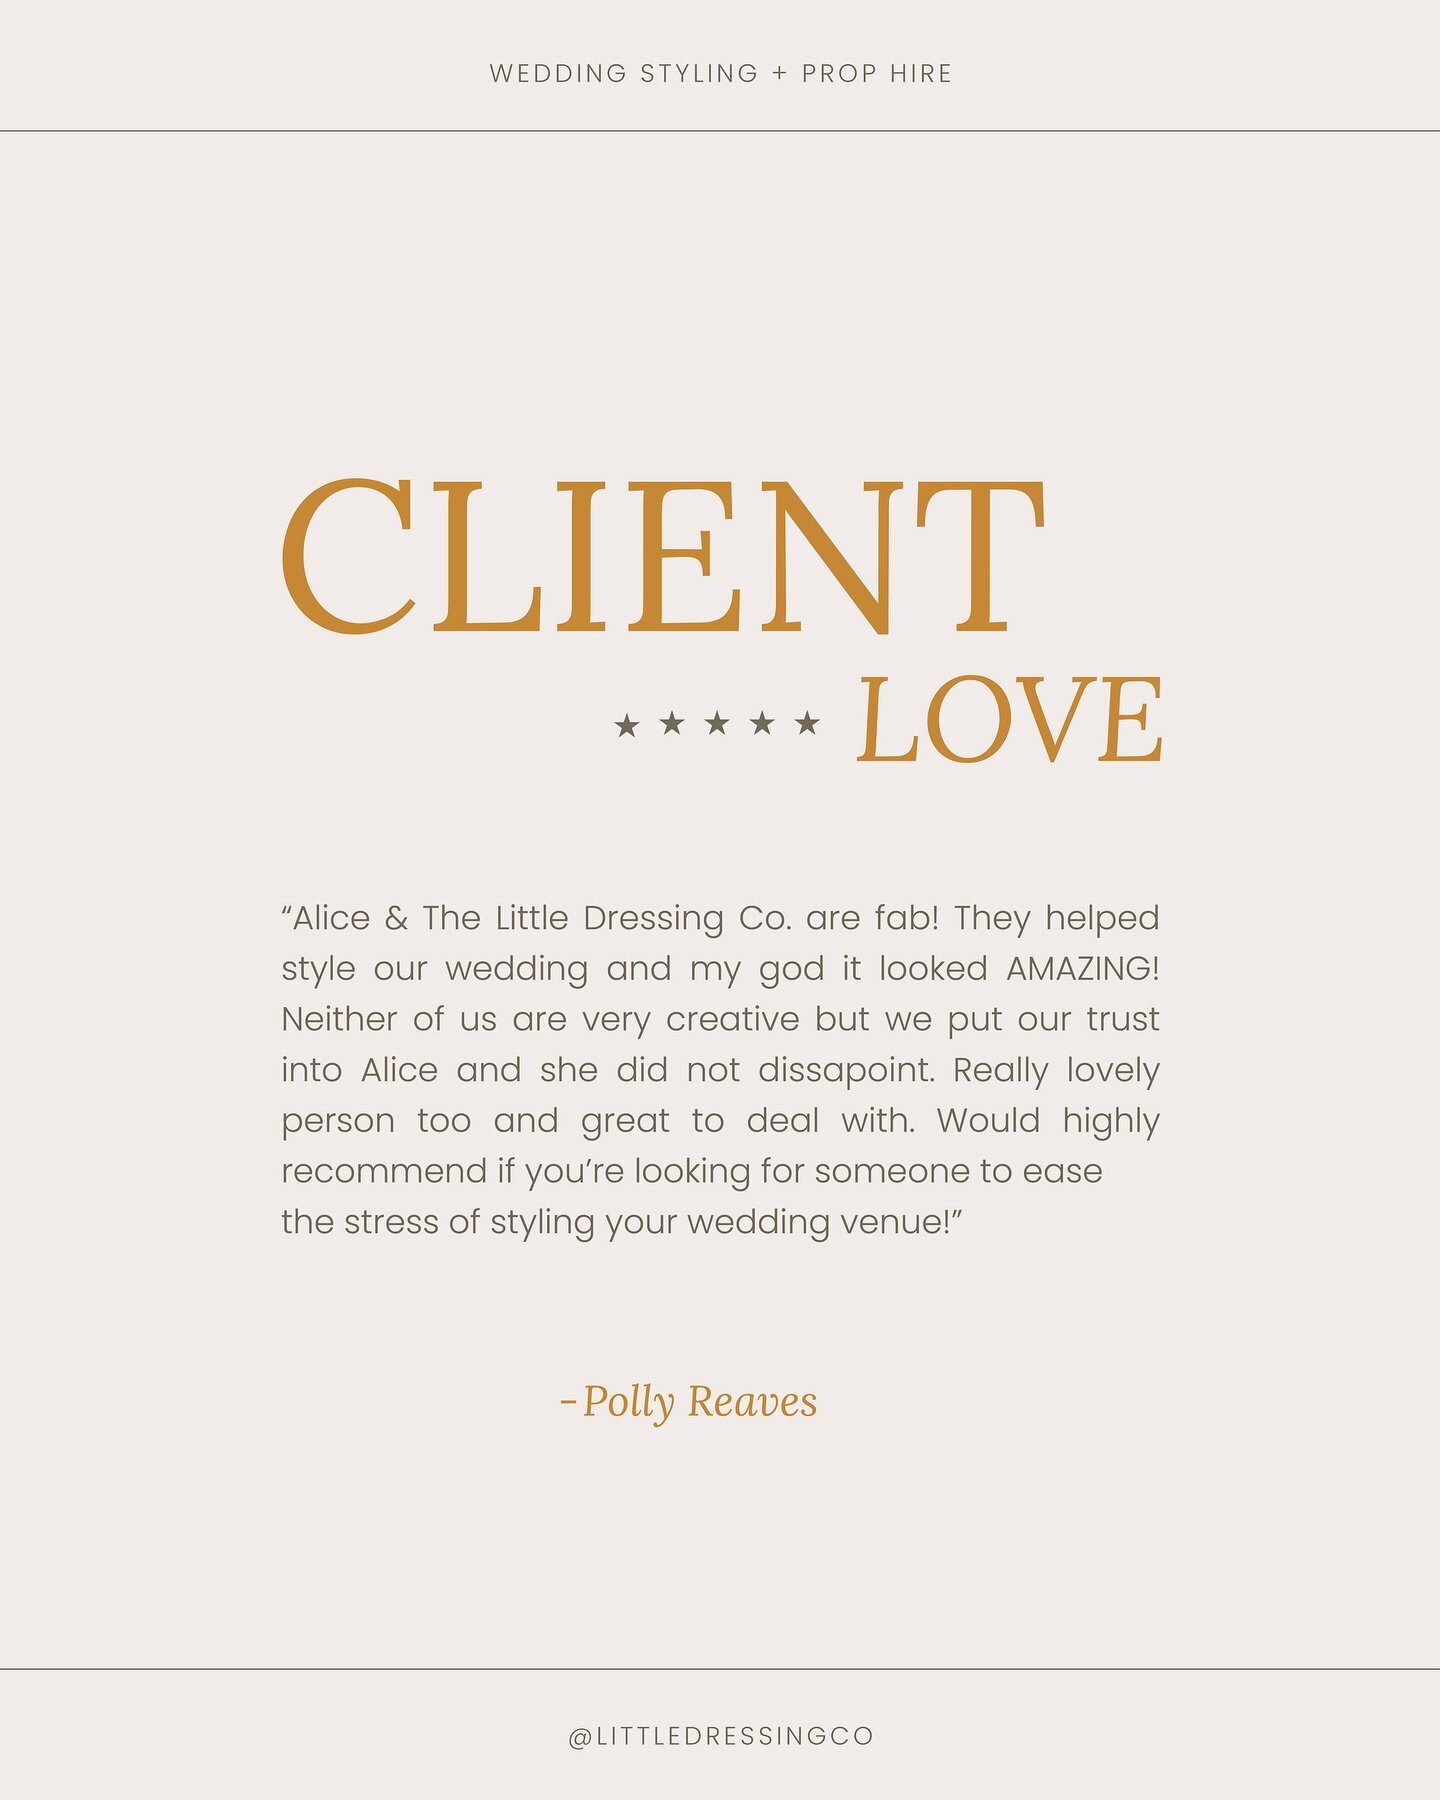 Nothing makes us happier than receiving lovely feedback from our wonderful clients! 🫶🏼

Interested in working with us to make your dream wedding a reality? Enquire via the link in our bio ✨

#scottishwedding #weddingstylist #eventstylist #clientlov